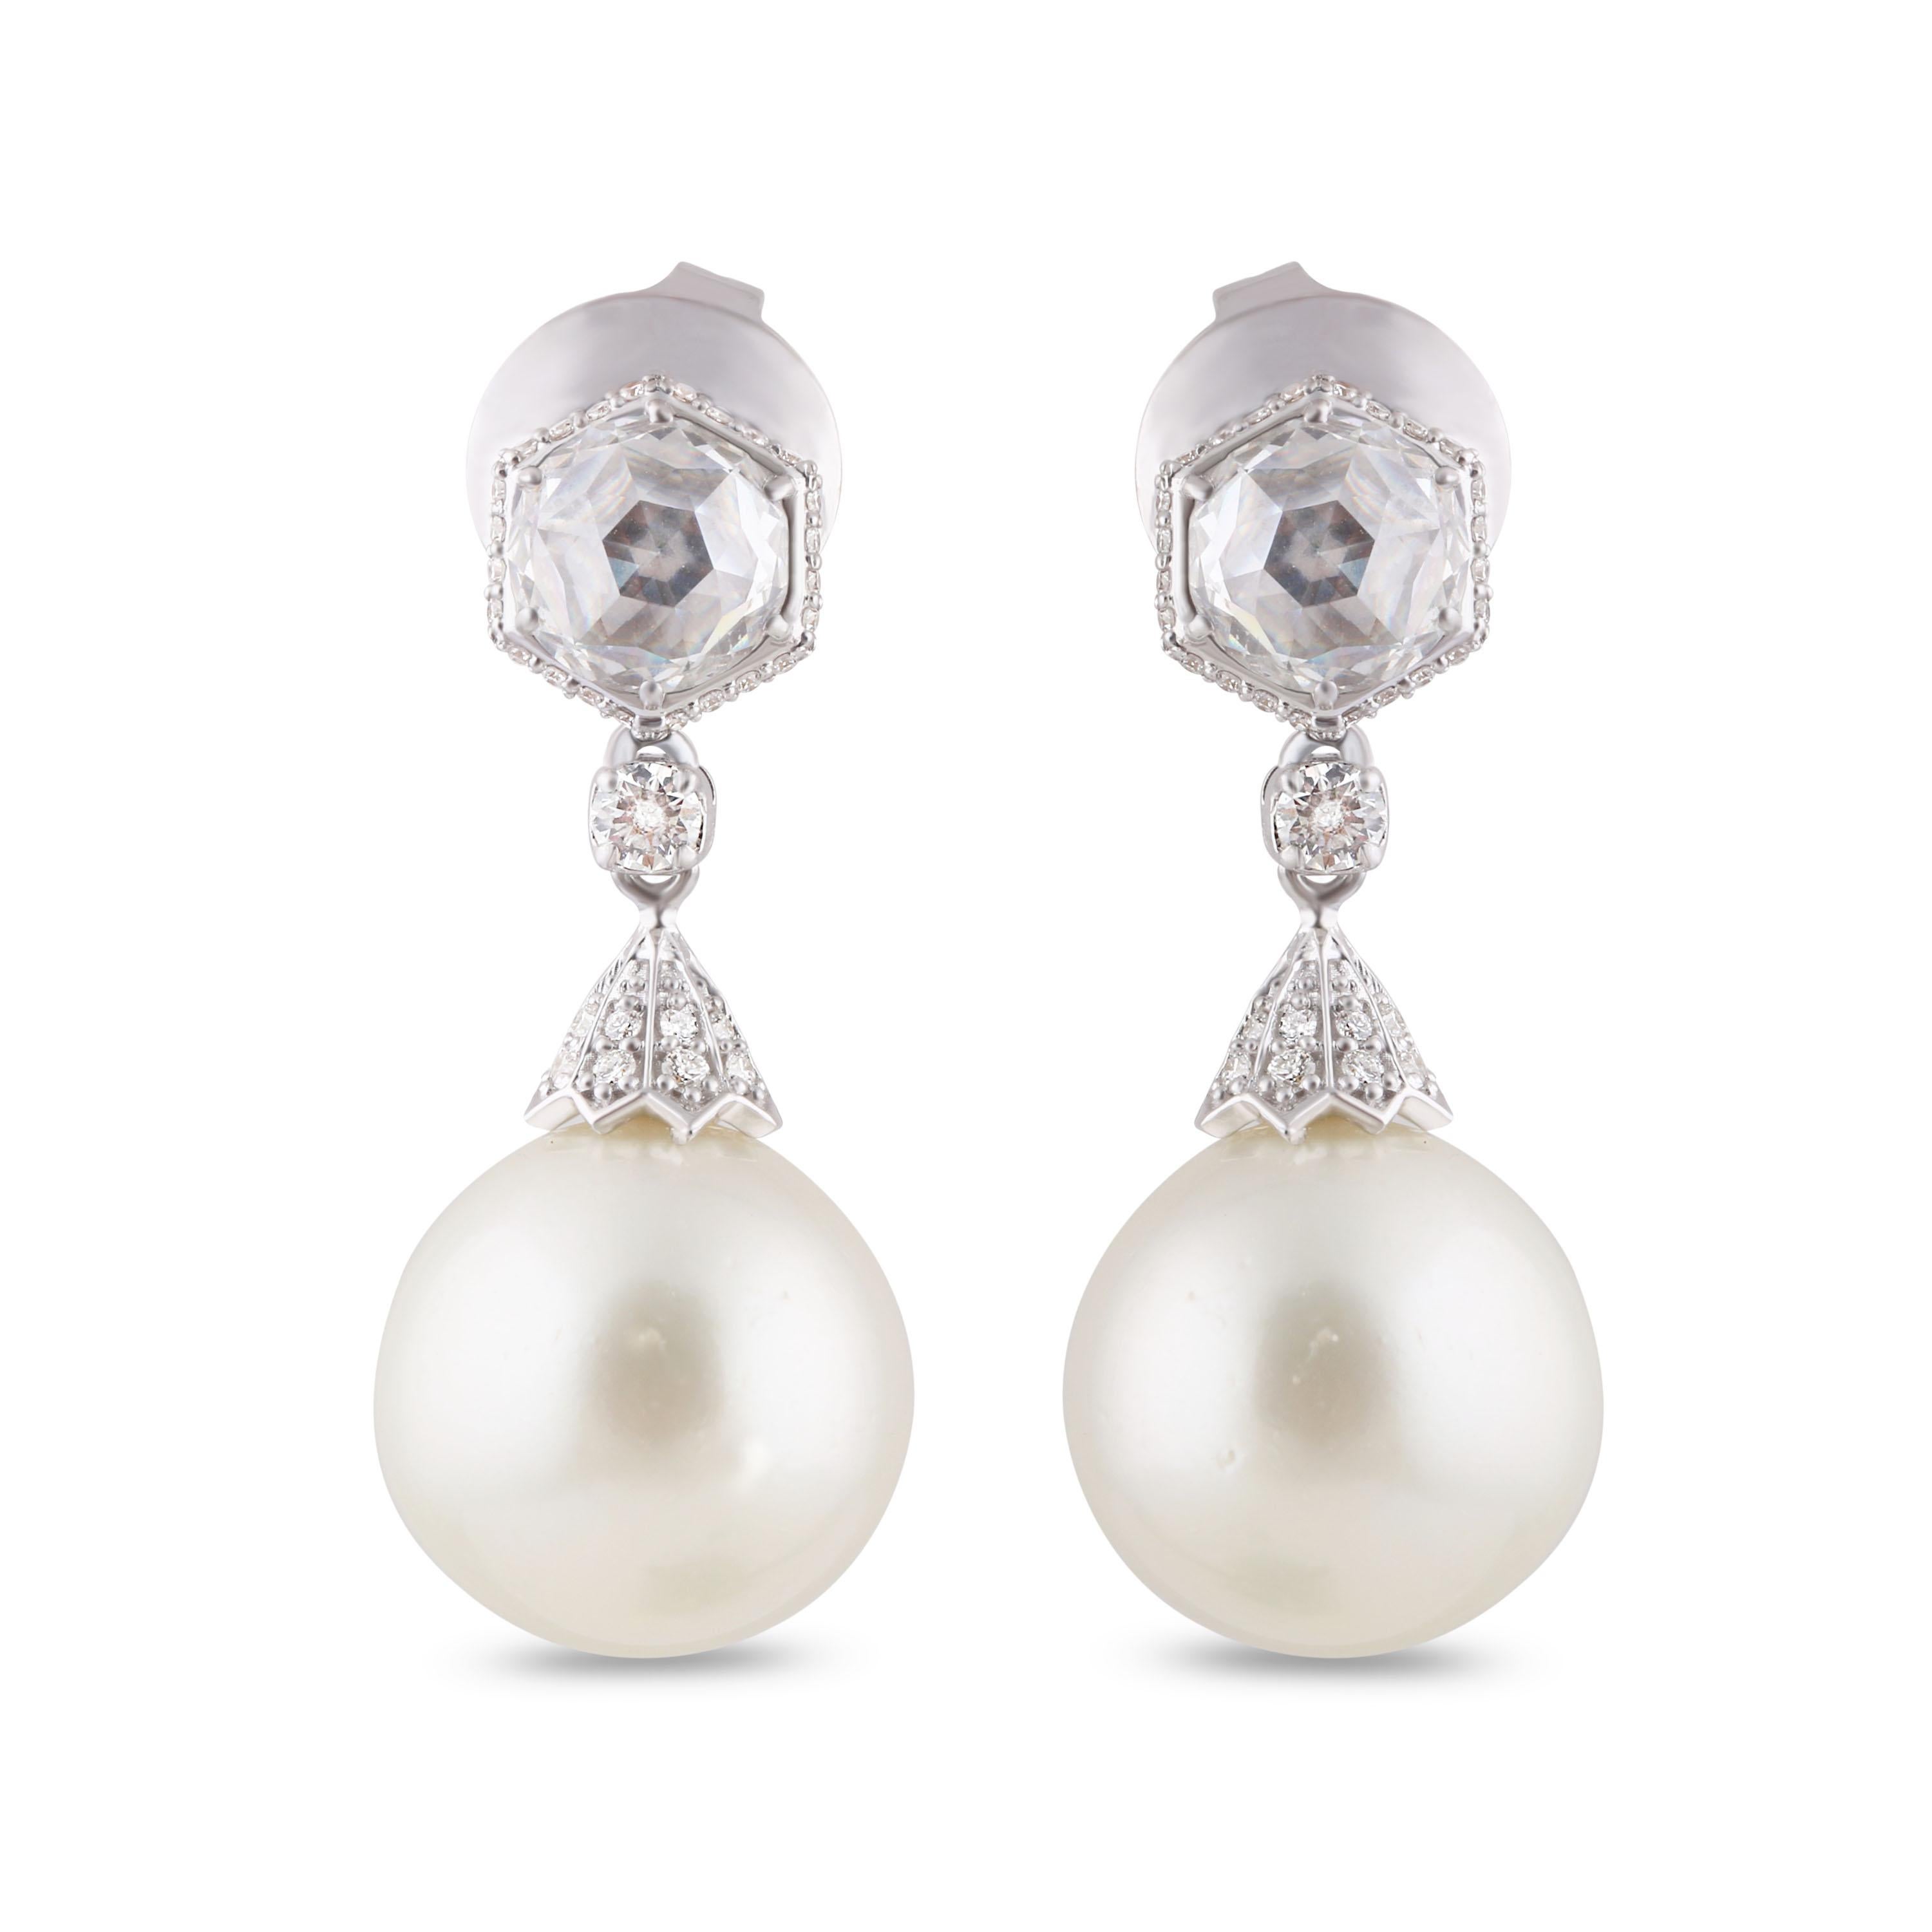 Studio Rêves Vintage Drop Earrings with Diamonds and Pearls in 18 Karat Gold In New Condition For Sale In Mumbai, Maharashtra